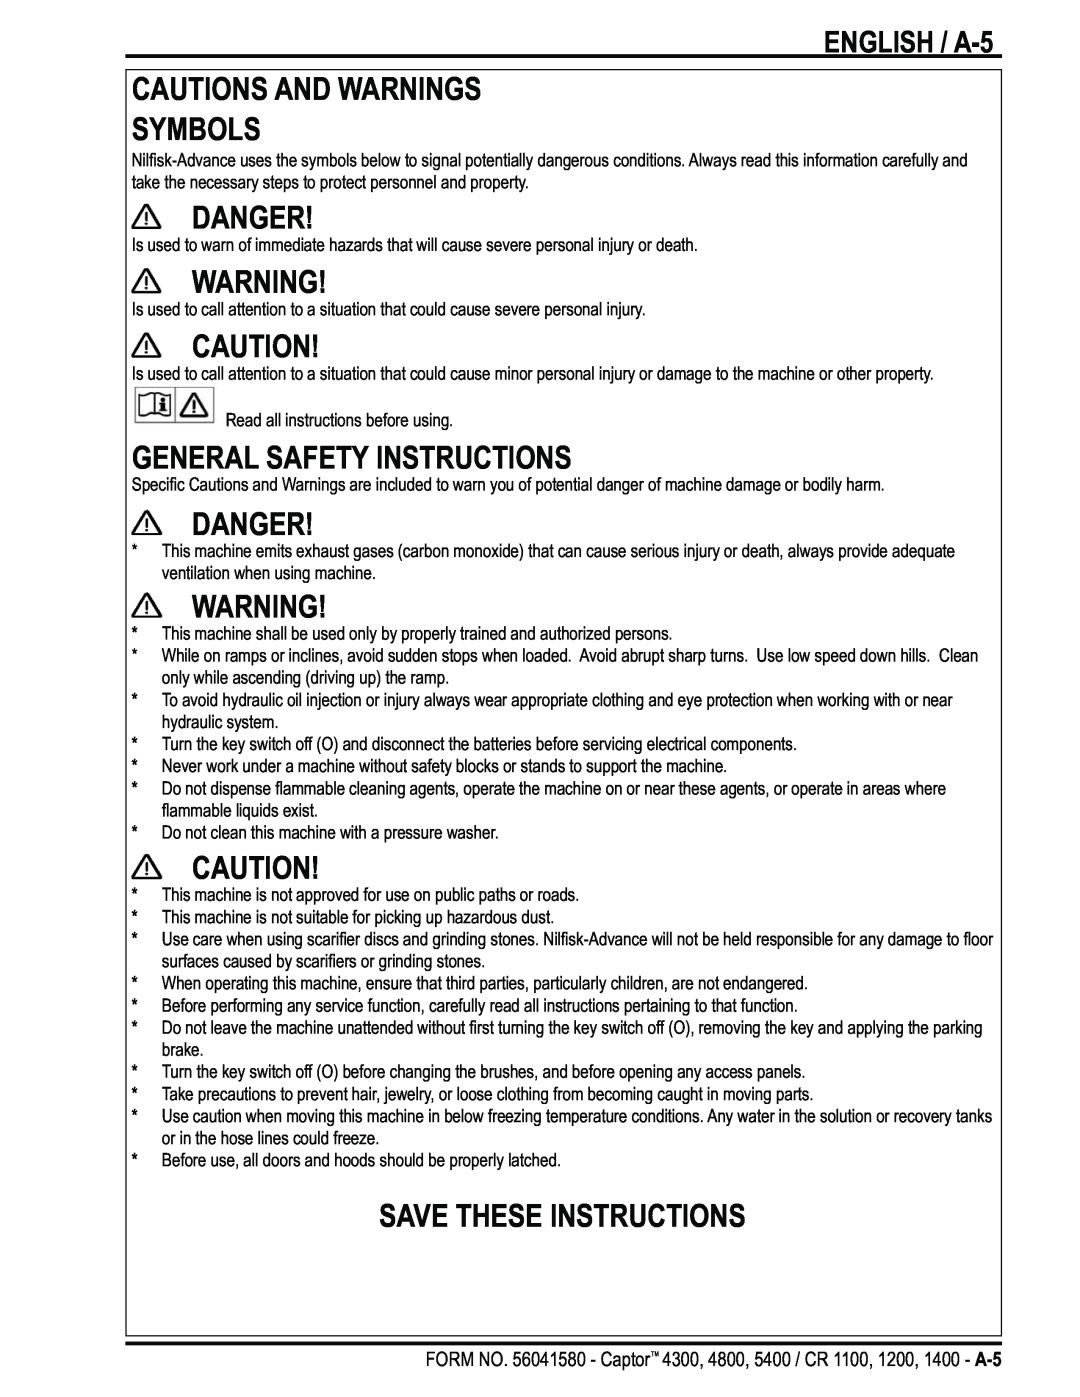 Nilfisk-ALTO 4300, 5400, 4800 Cautions And Warnings Symbols, Danger, General Safety Instructions, Save These Instructions 